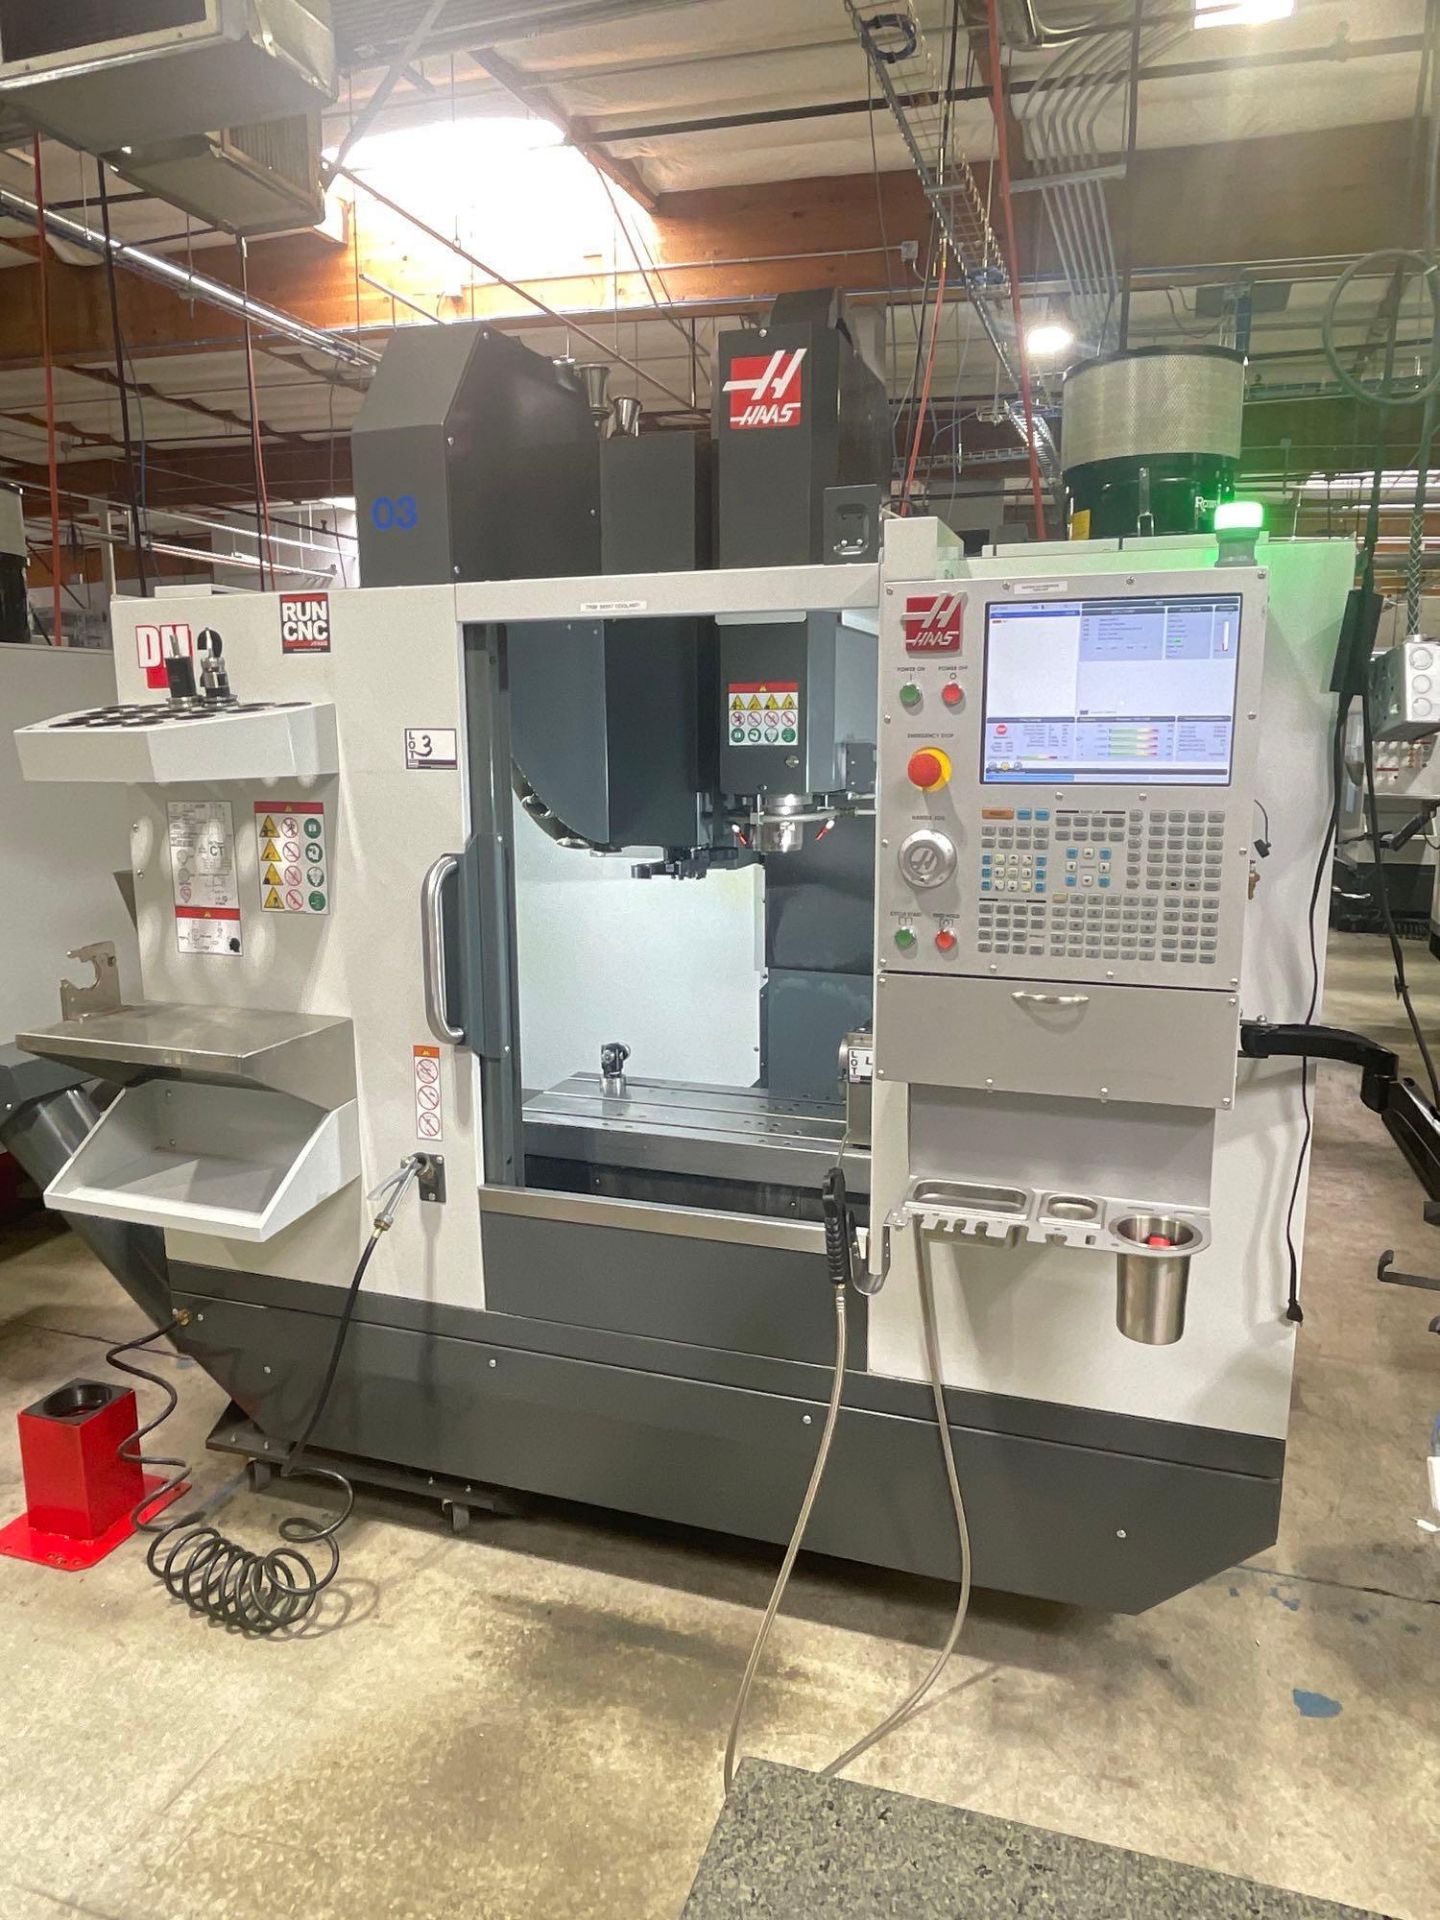 Haas DM-2, 28” x 16” x 15.5” Travels, CT 40, 18+1 SMTC, CTS, WIPS, as New as 2021 - Image 4 of 13